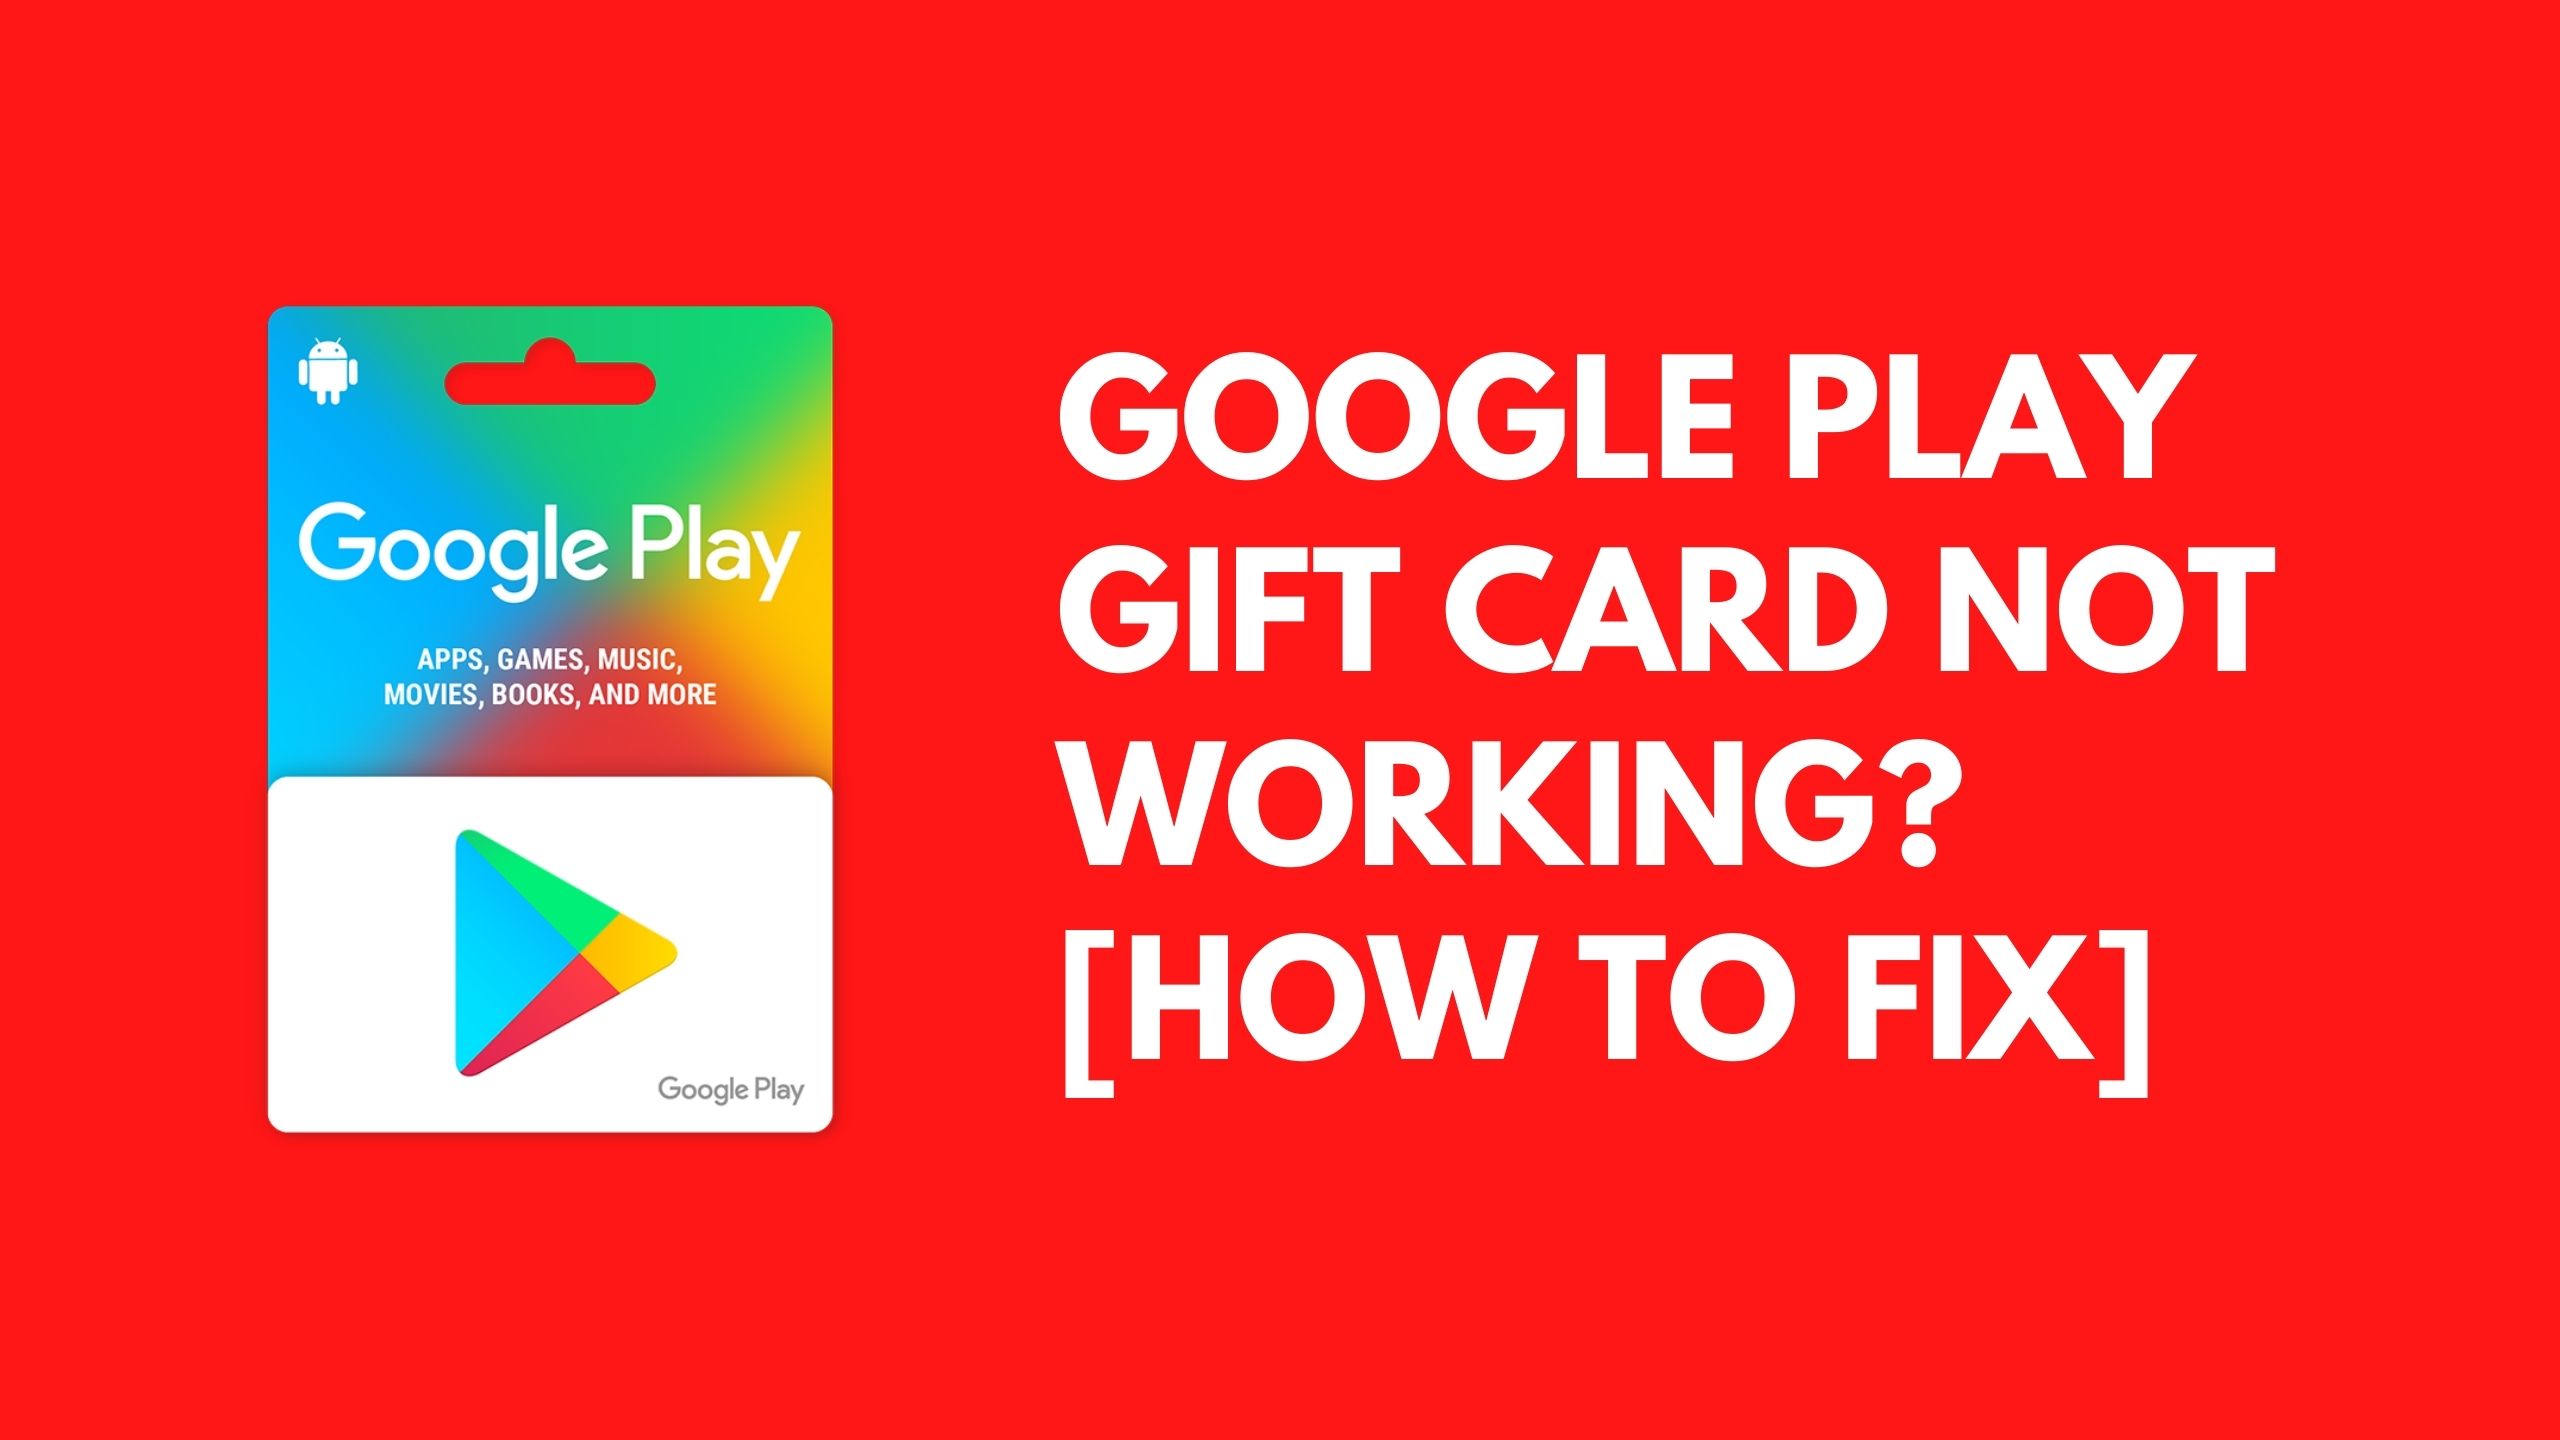 oogle Play Gift Card Not Working FIX